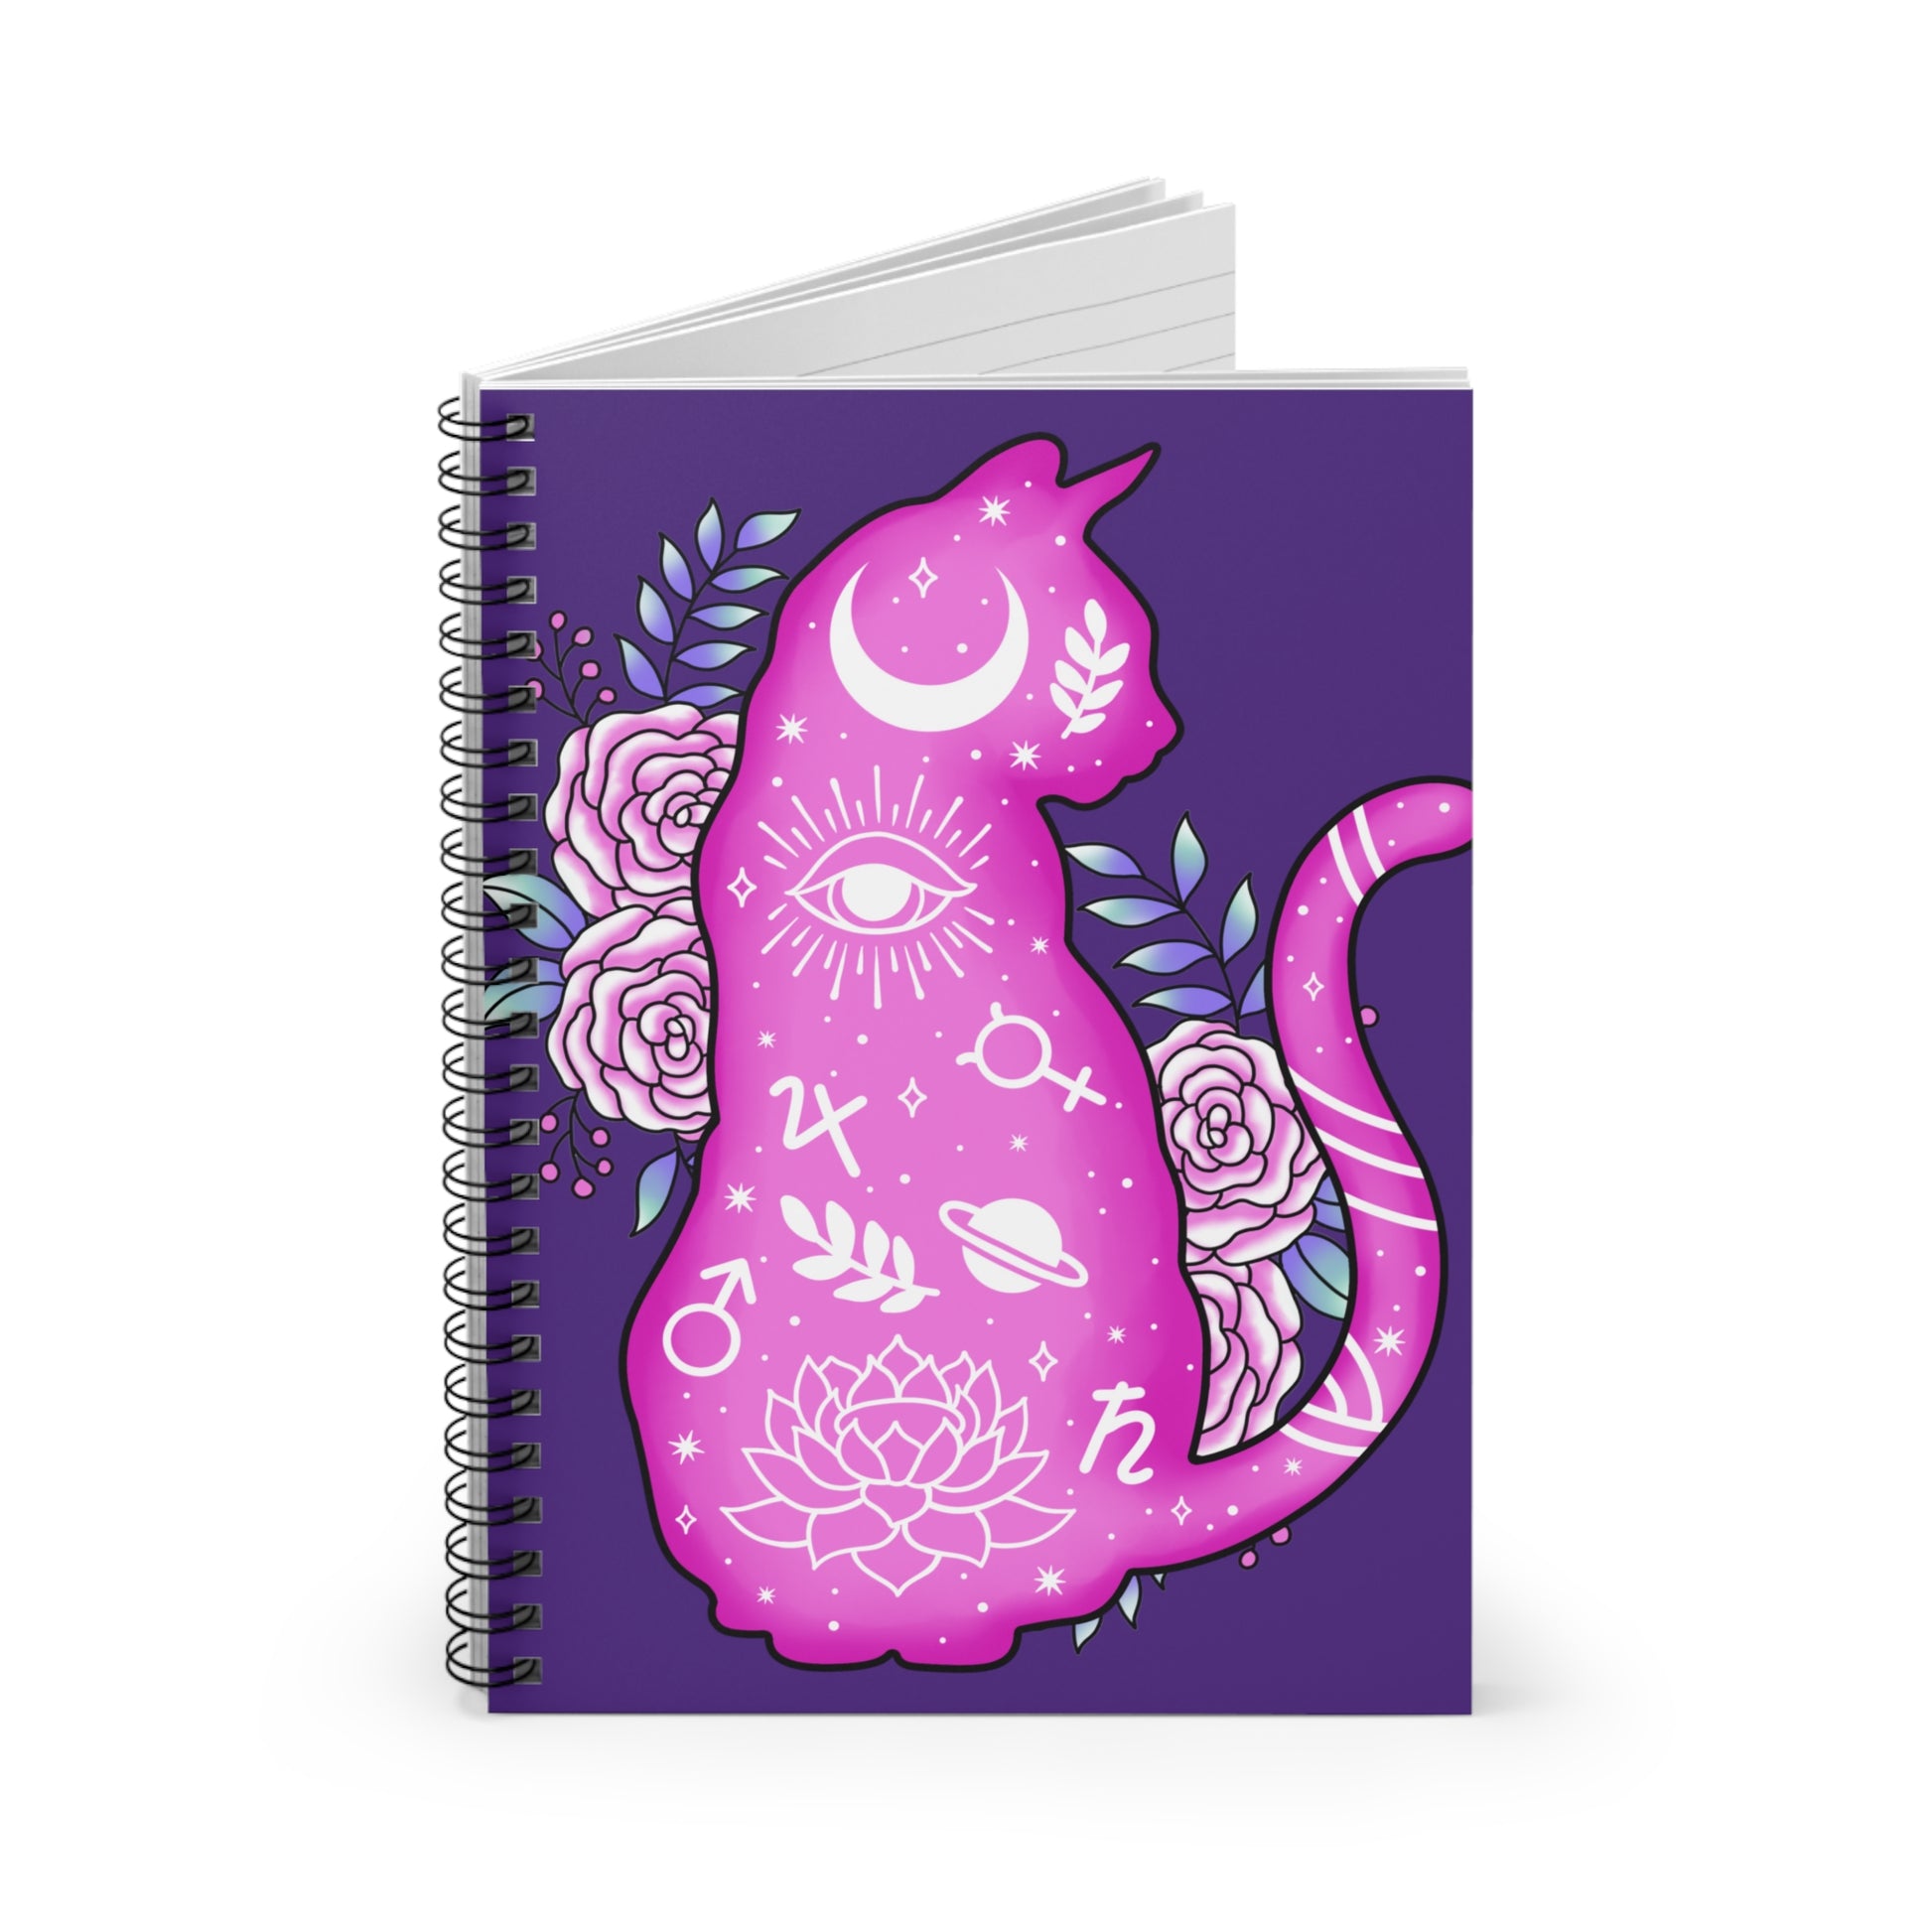 Astral Familiar - I Love You: Spiral Notebook - Log Books - Journals - Diaries - and More Custom Printed by TheGlassyLass